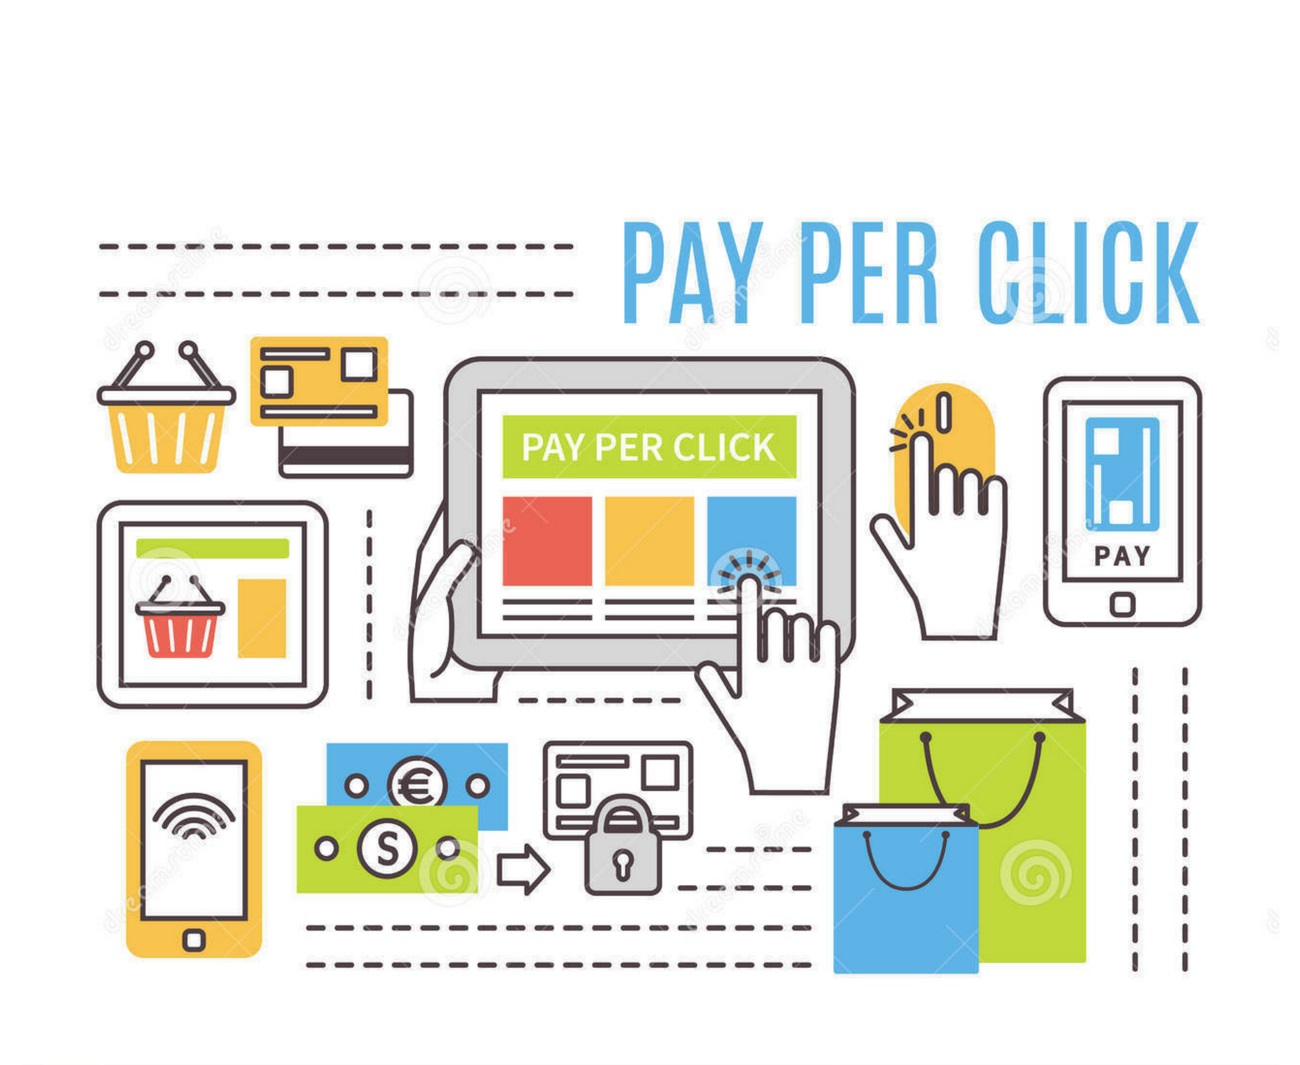 Is Pay-Per-Click Advertising Right for My Business?